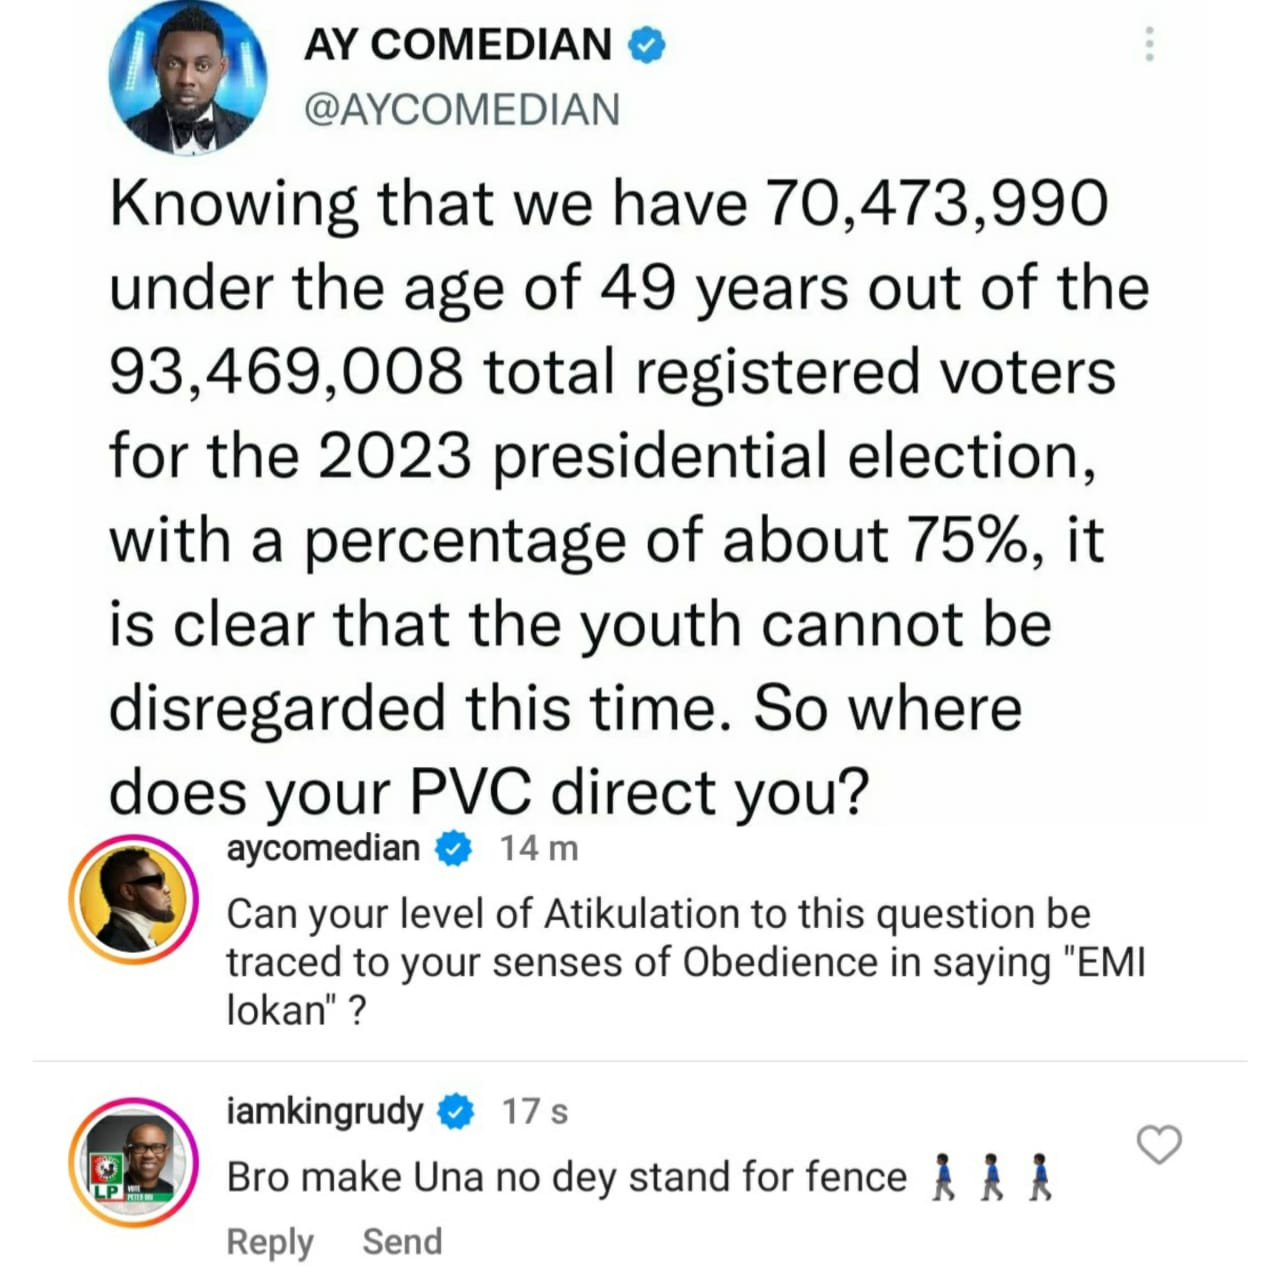 2023 elections: Singer Paul Okoye tells comedian AY Makun to stop sitting on the fence